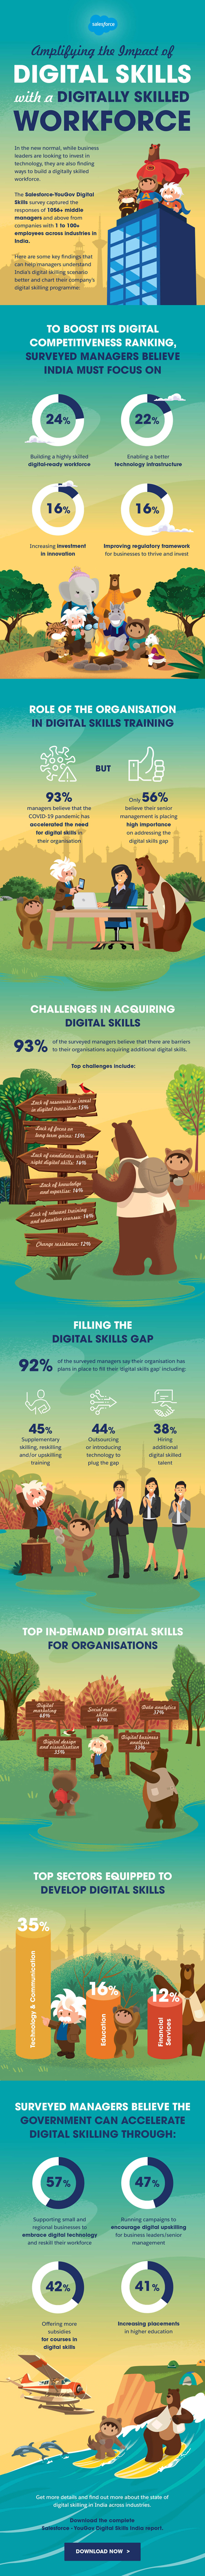 Amplifying the impact of digital skills with a digitally skilled workforce